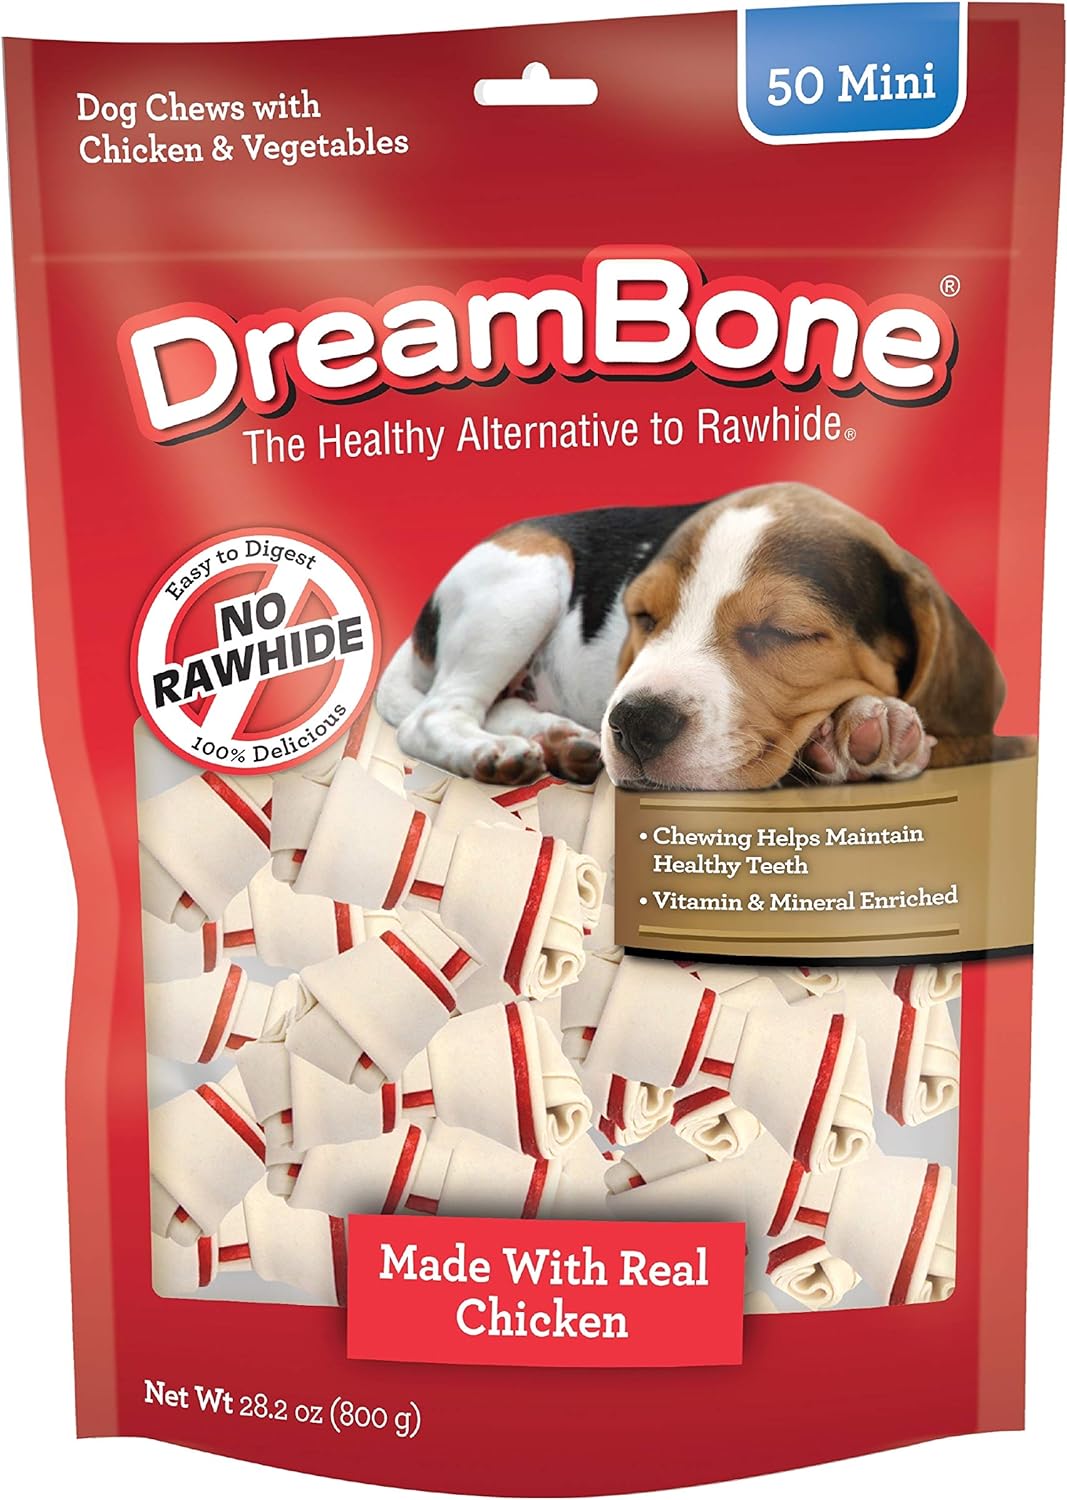 DreamBone Mini Chew, Made with Real Chicken & Vegetables, Rawhide Free Chews For Dogs, 50 Count